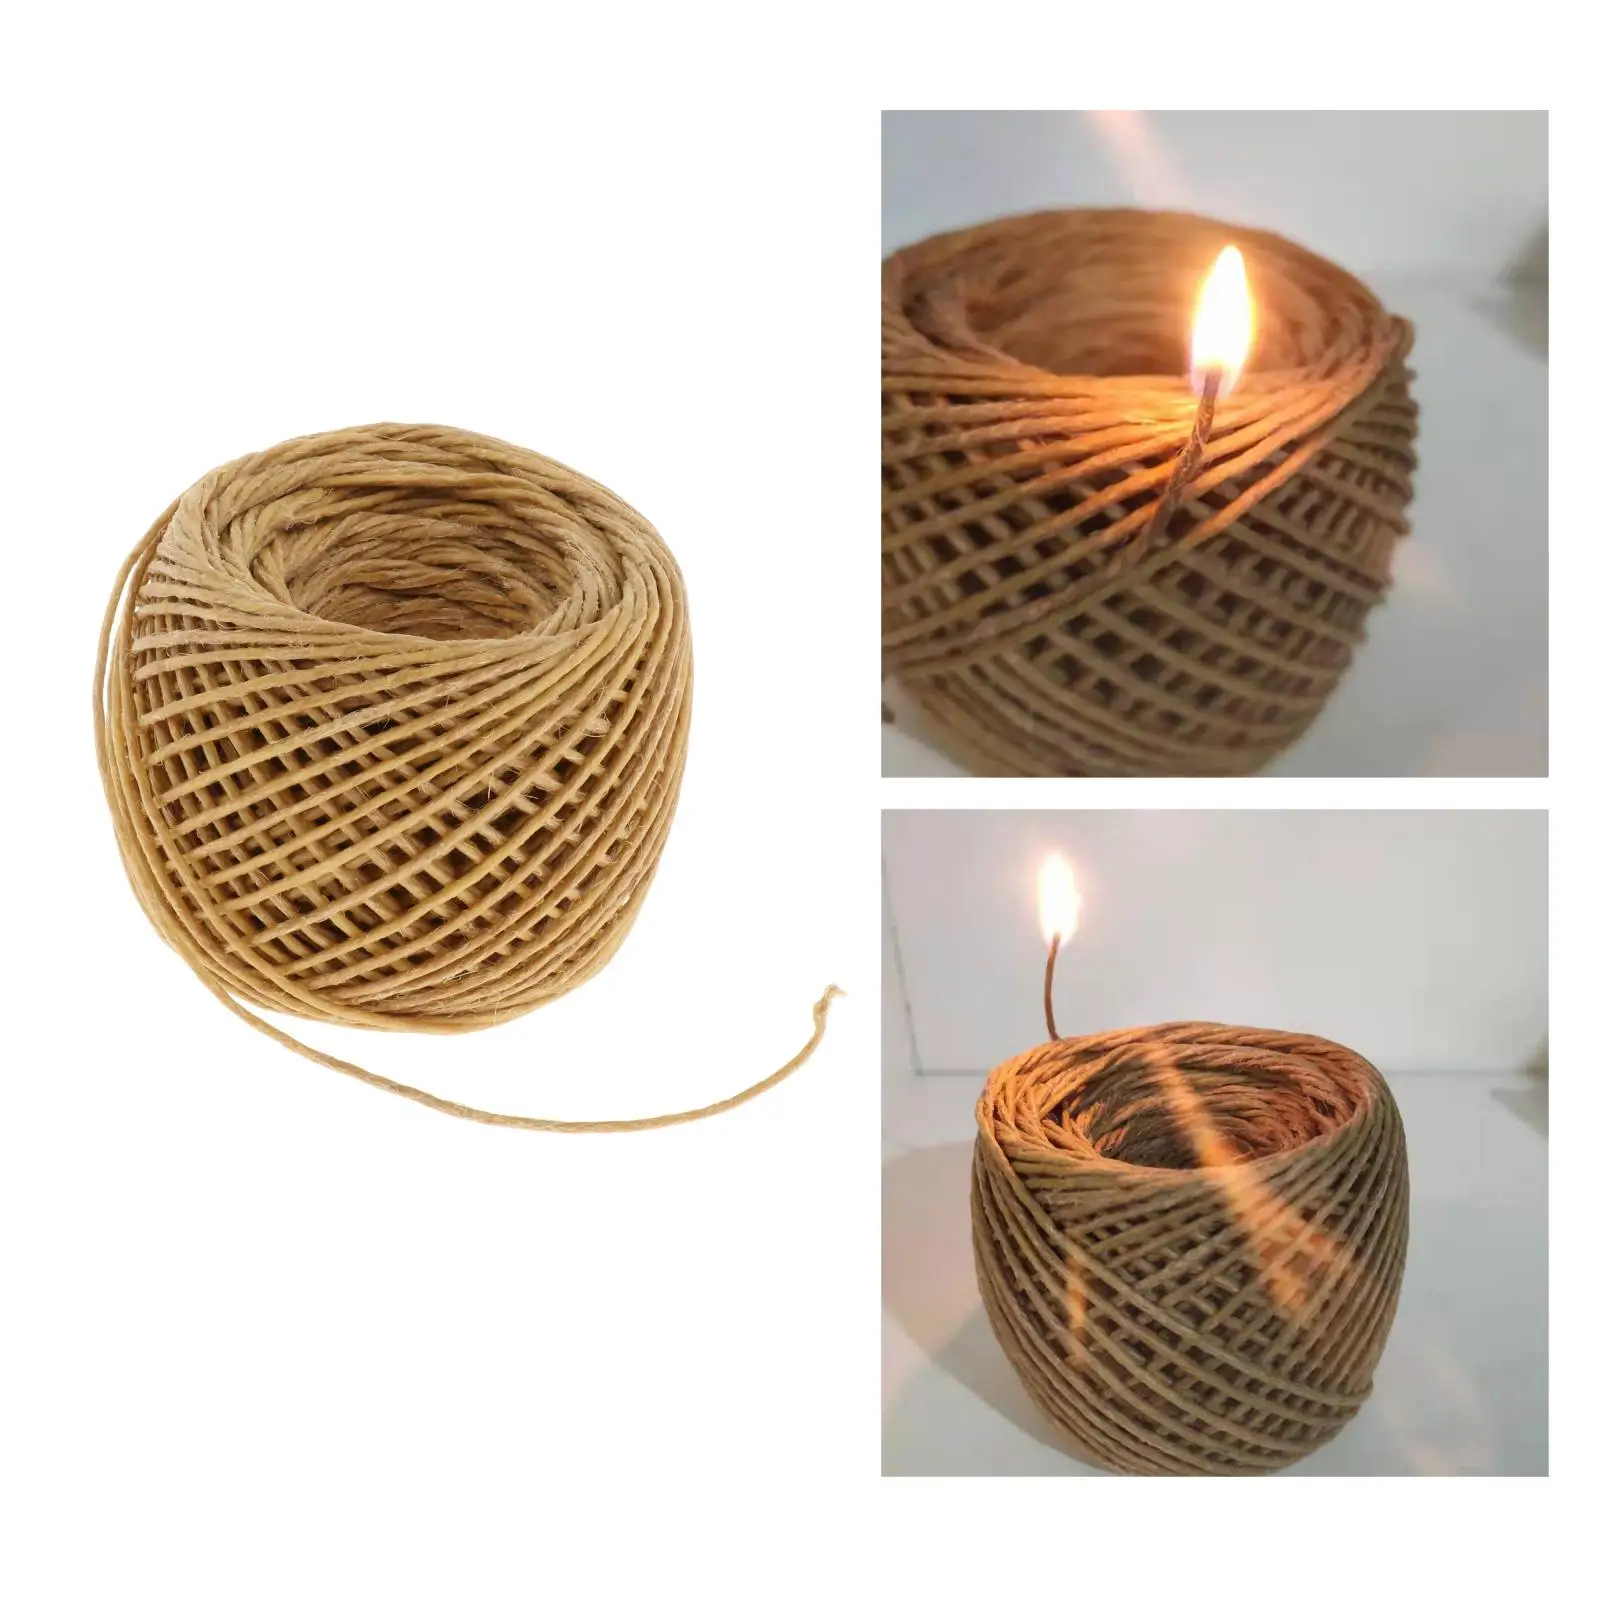 61m Premium Hempwick Candle Wick Lighter 2mm Handmade Natural with Beeswax Coating Organic Candle Making Craft Rope